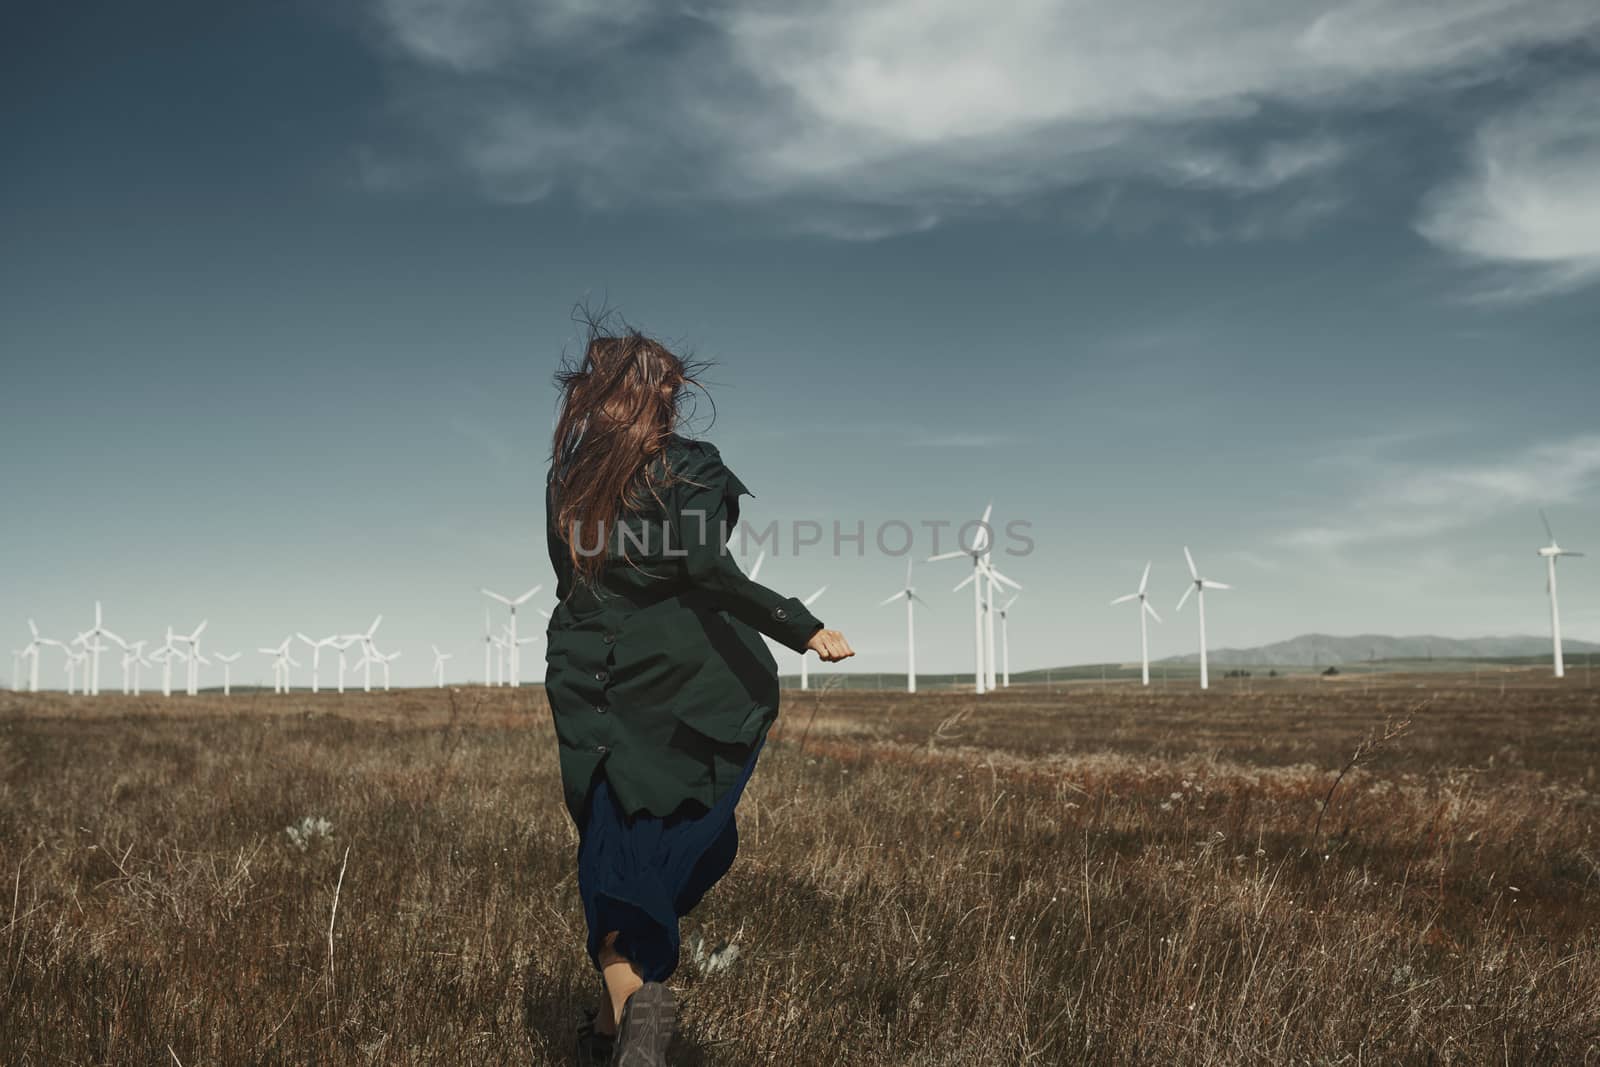 Woman with long tousled hair next to the wind turbine with the wind blowing